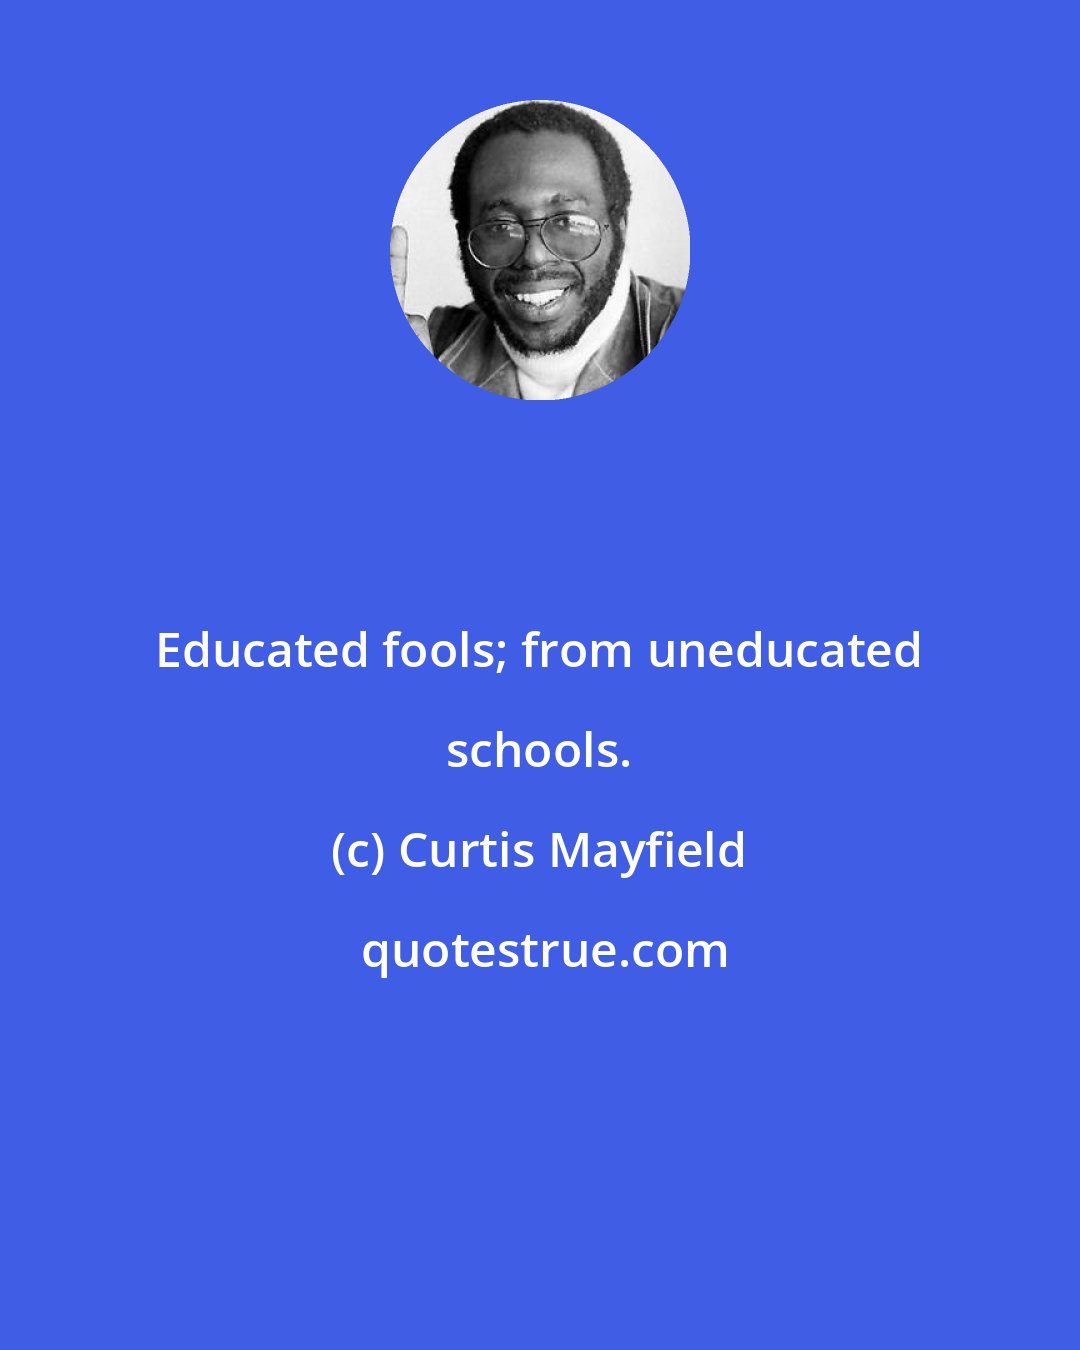 Curtis Mayfield: Educated fools; from uneducated schools.